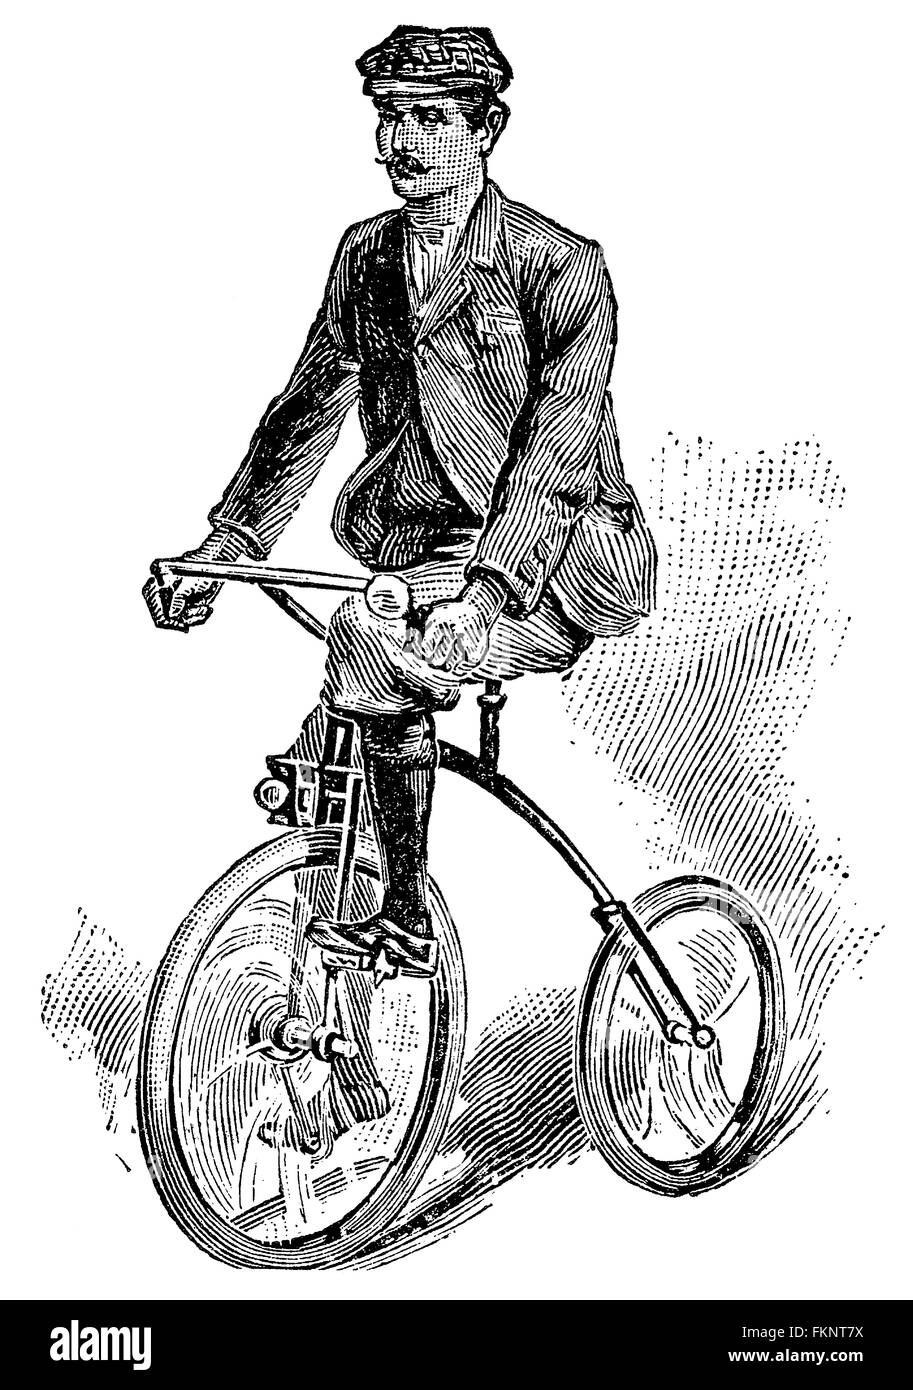 Black and white engraving of a Victorian gentleman riding a bicycle. Stock Photo